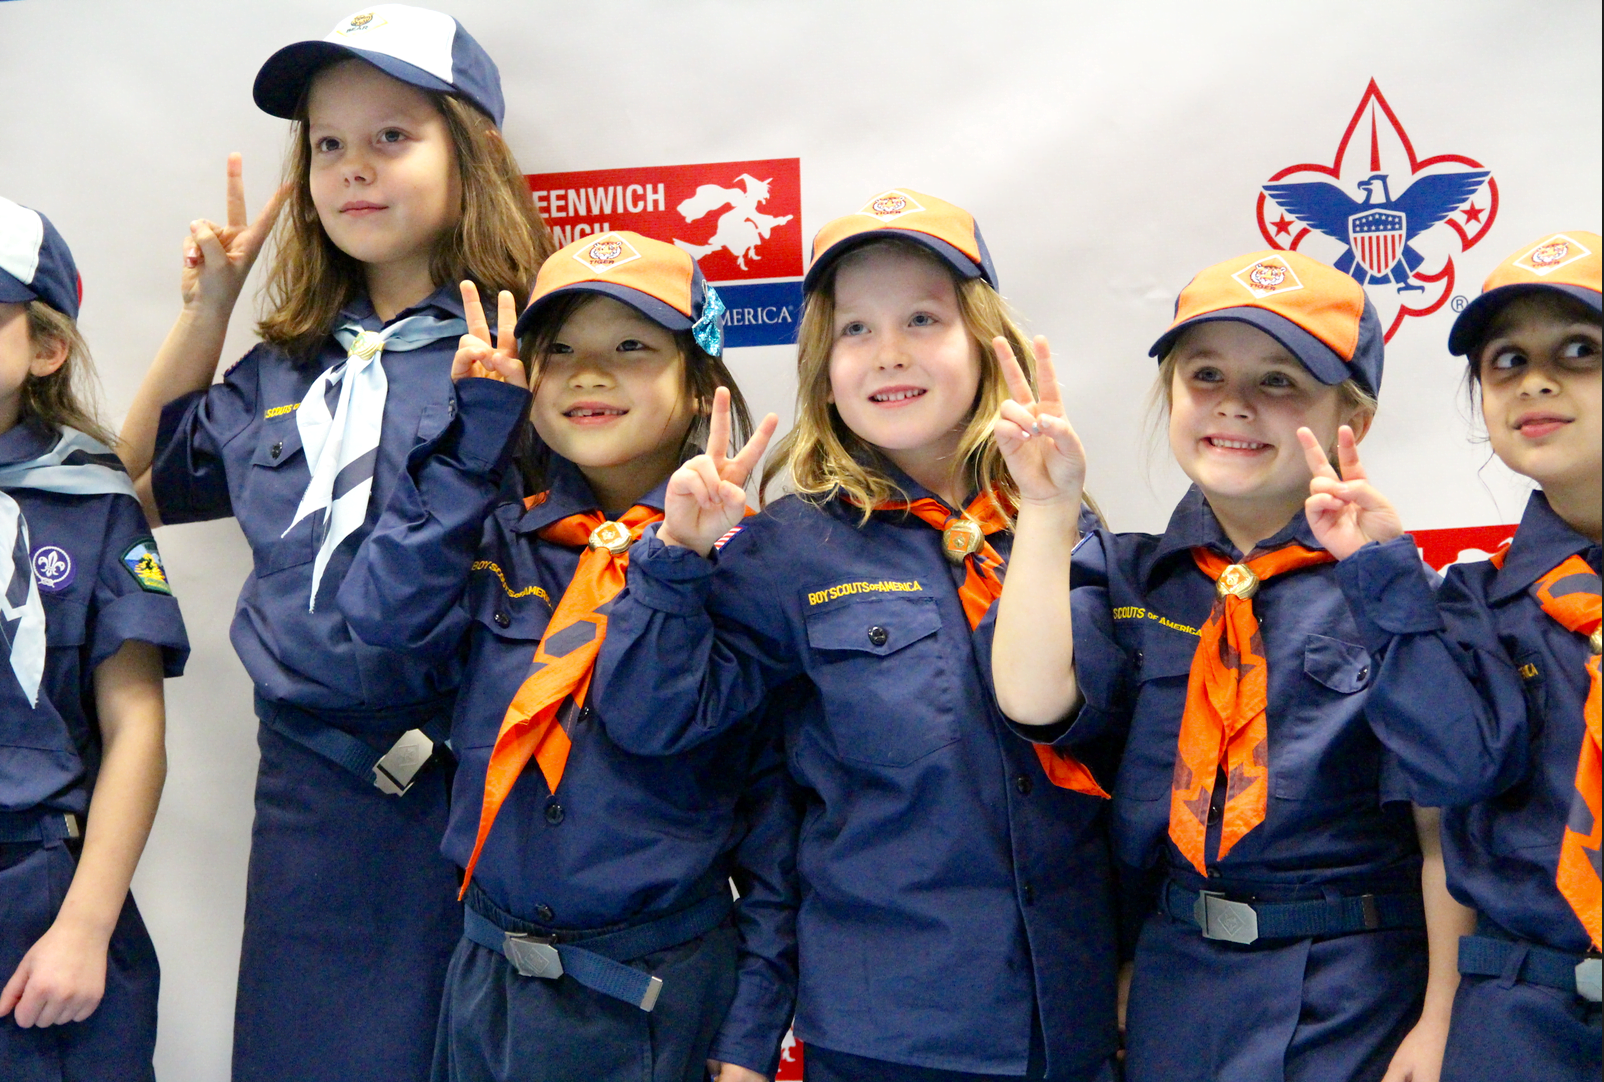 Nine new members of Cub Scout pack 23 at North Mianus School earned their Bobcat badges on Feb 8, 2018 Photo: Leslie Yager